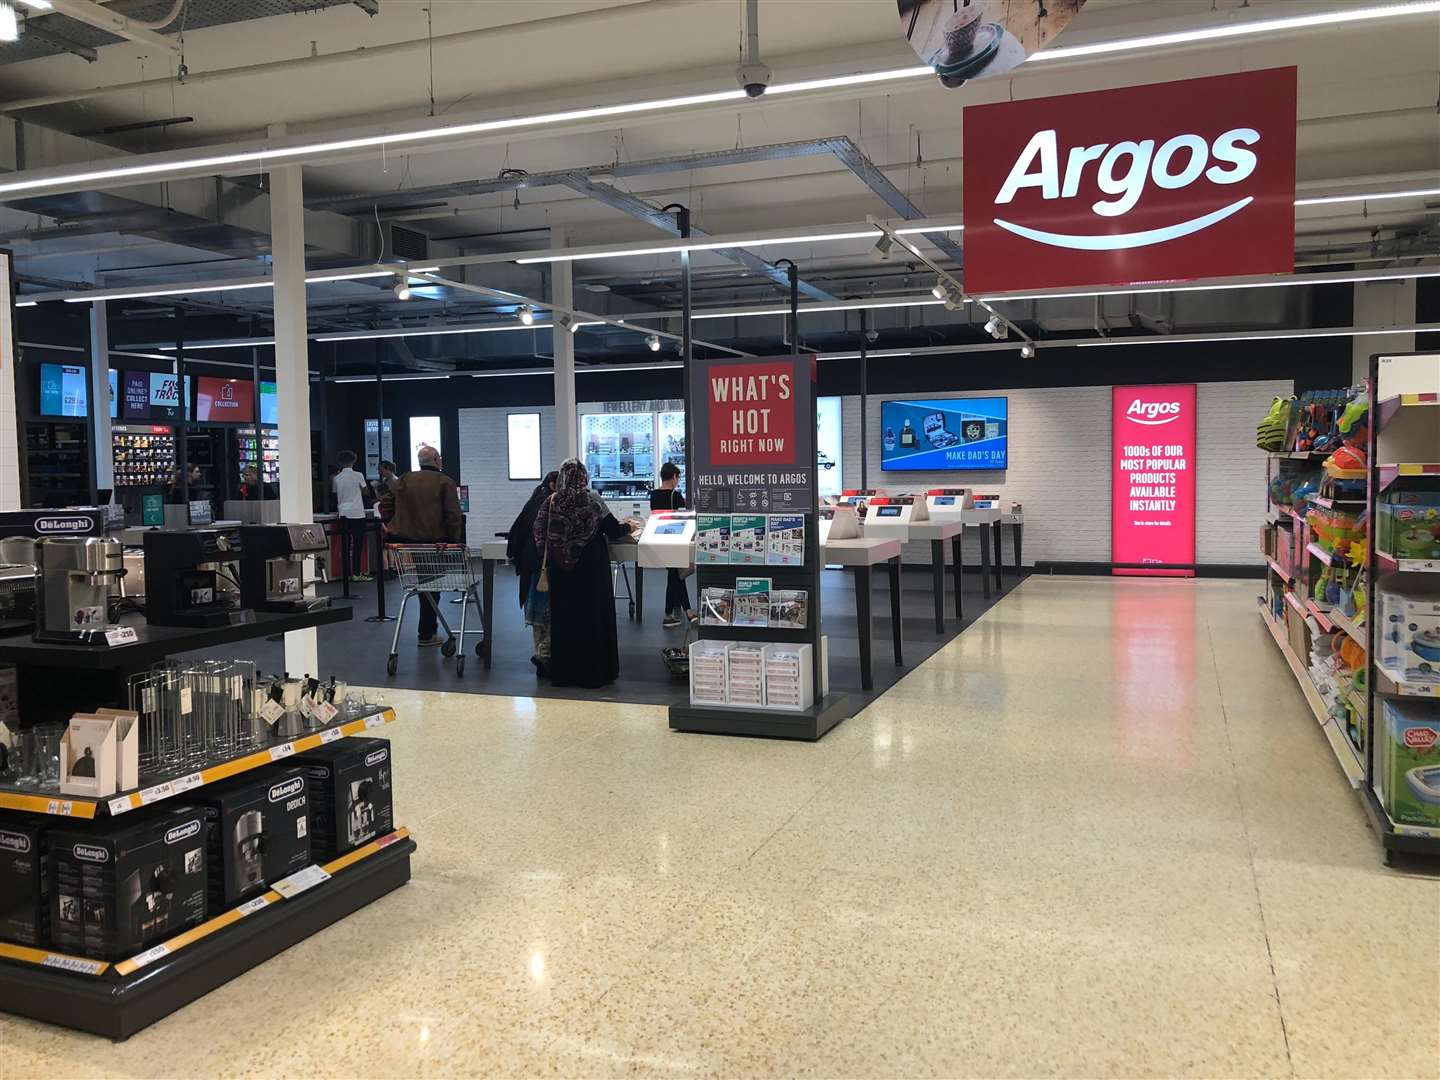 Argos has opened in Sainsbury's in Ashford - Deal is next on the list